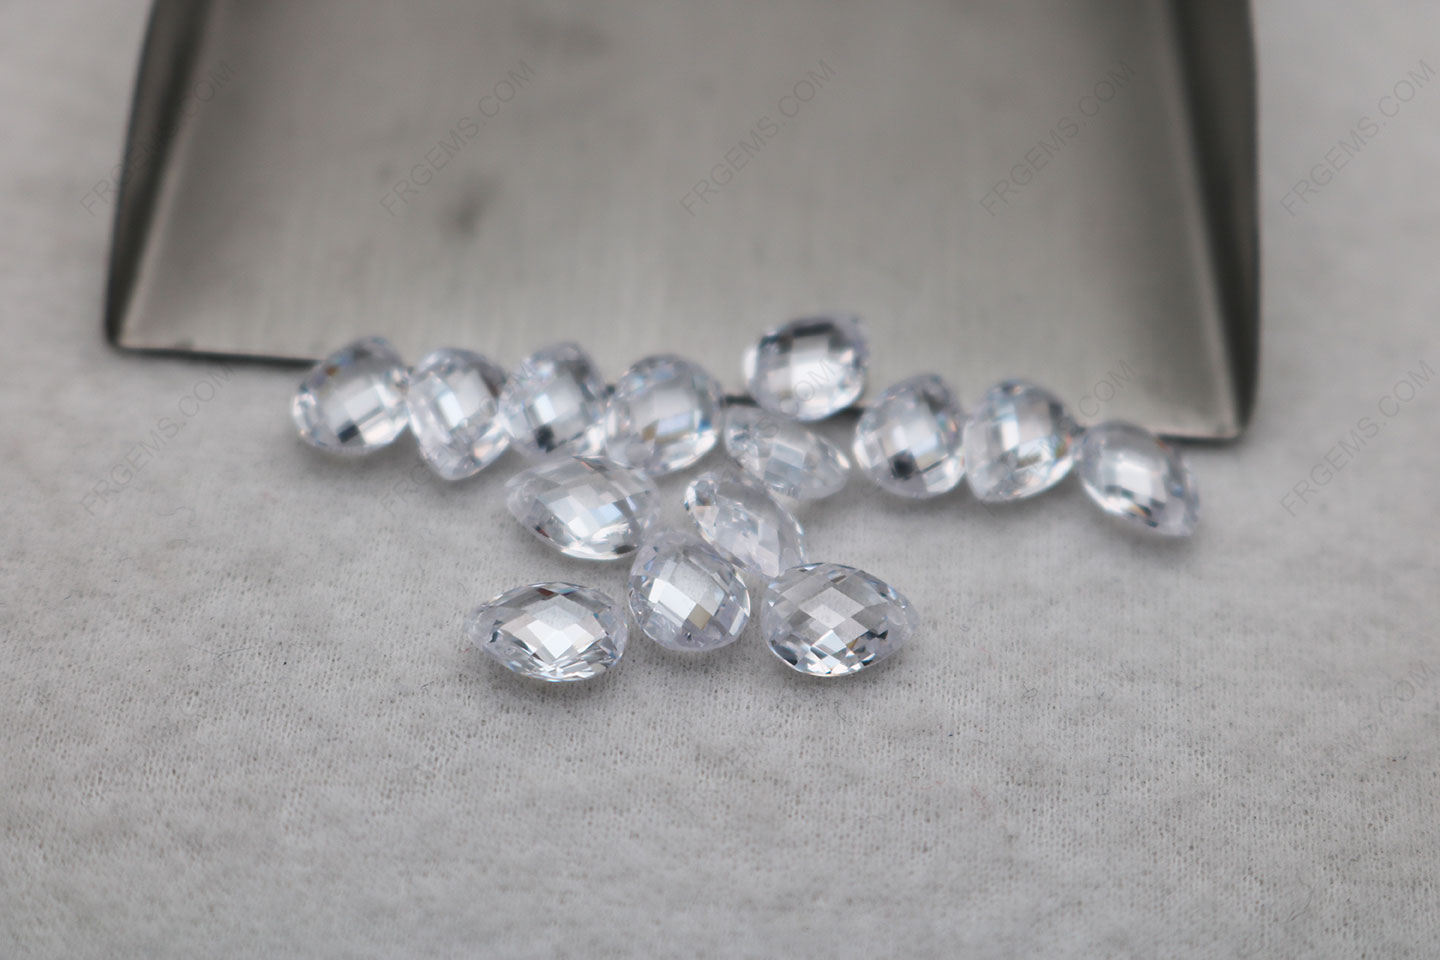 Loose Cubic Zirconia White Color Pear Shape Double Checkerboard Faceted 6x8mm drilled hole gemstones